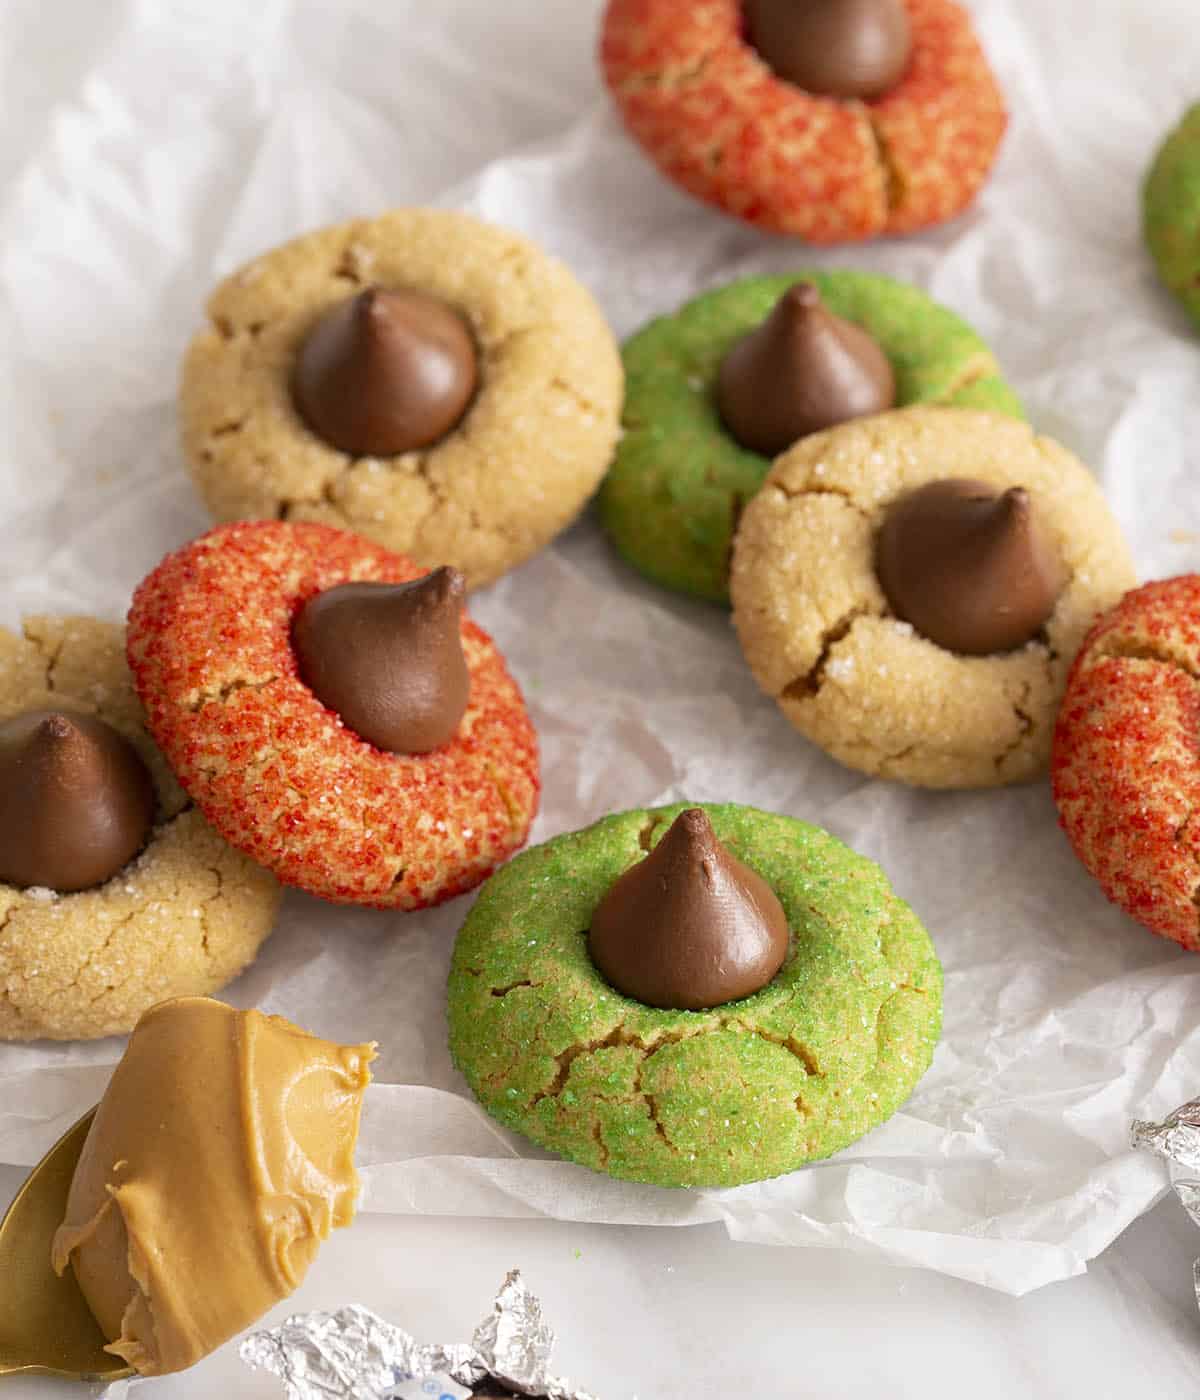 Peanut butter blossoms covered in red, green and white sanding sugar.